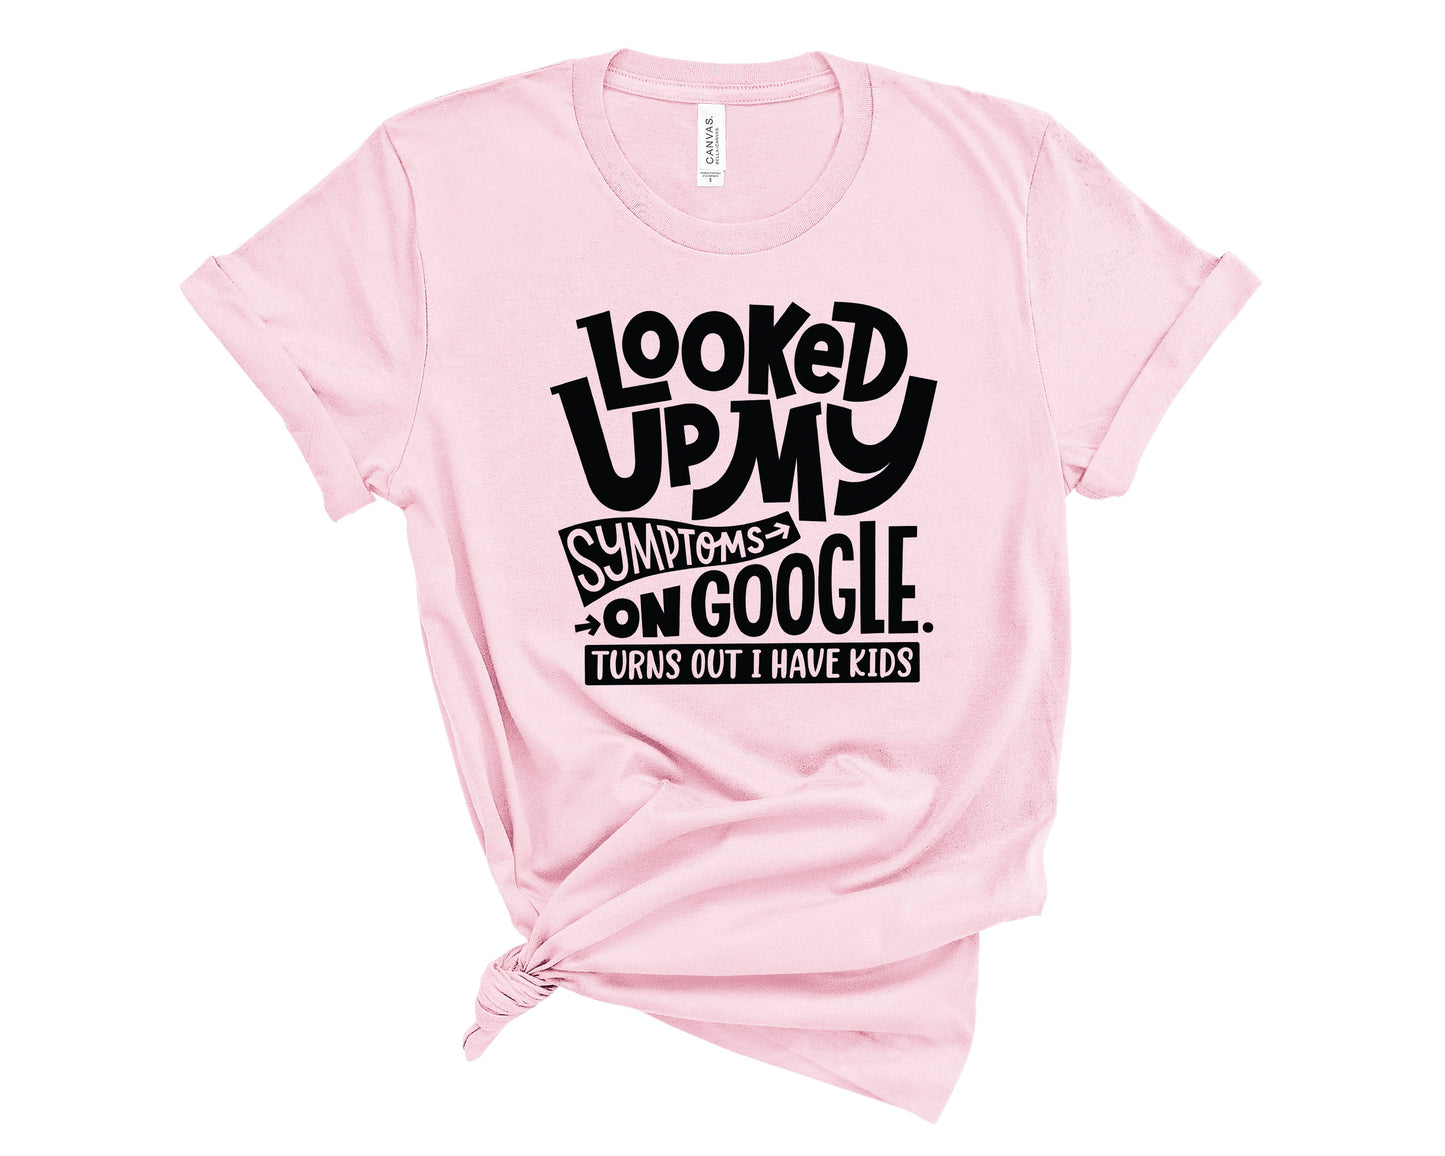 Looked Up My Symptoms On Google Turns Out I Have Kids T-Shirt or Crew Sweatshirt